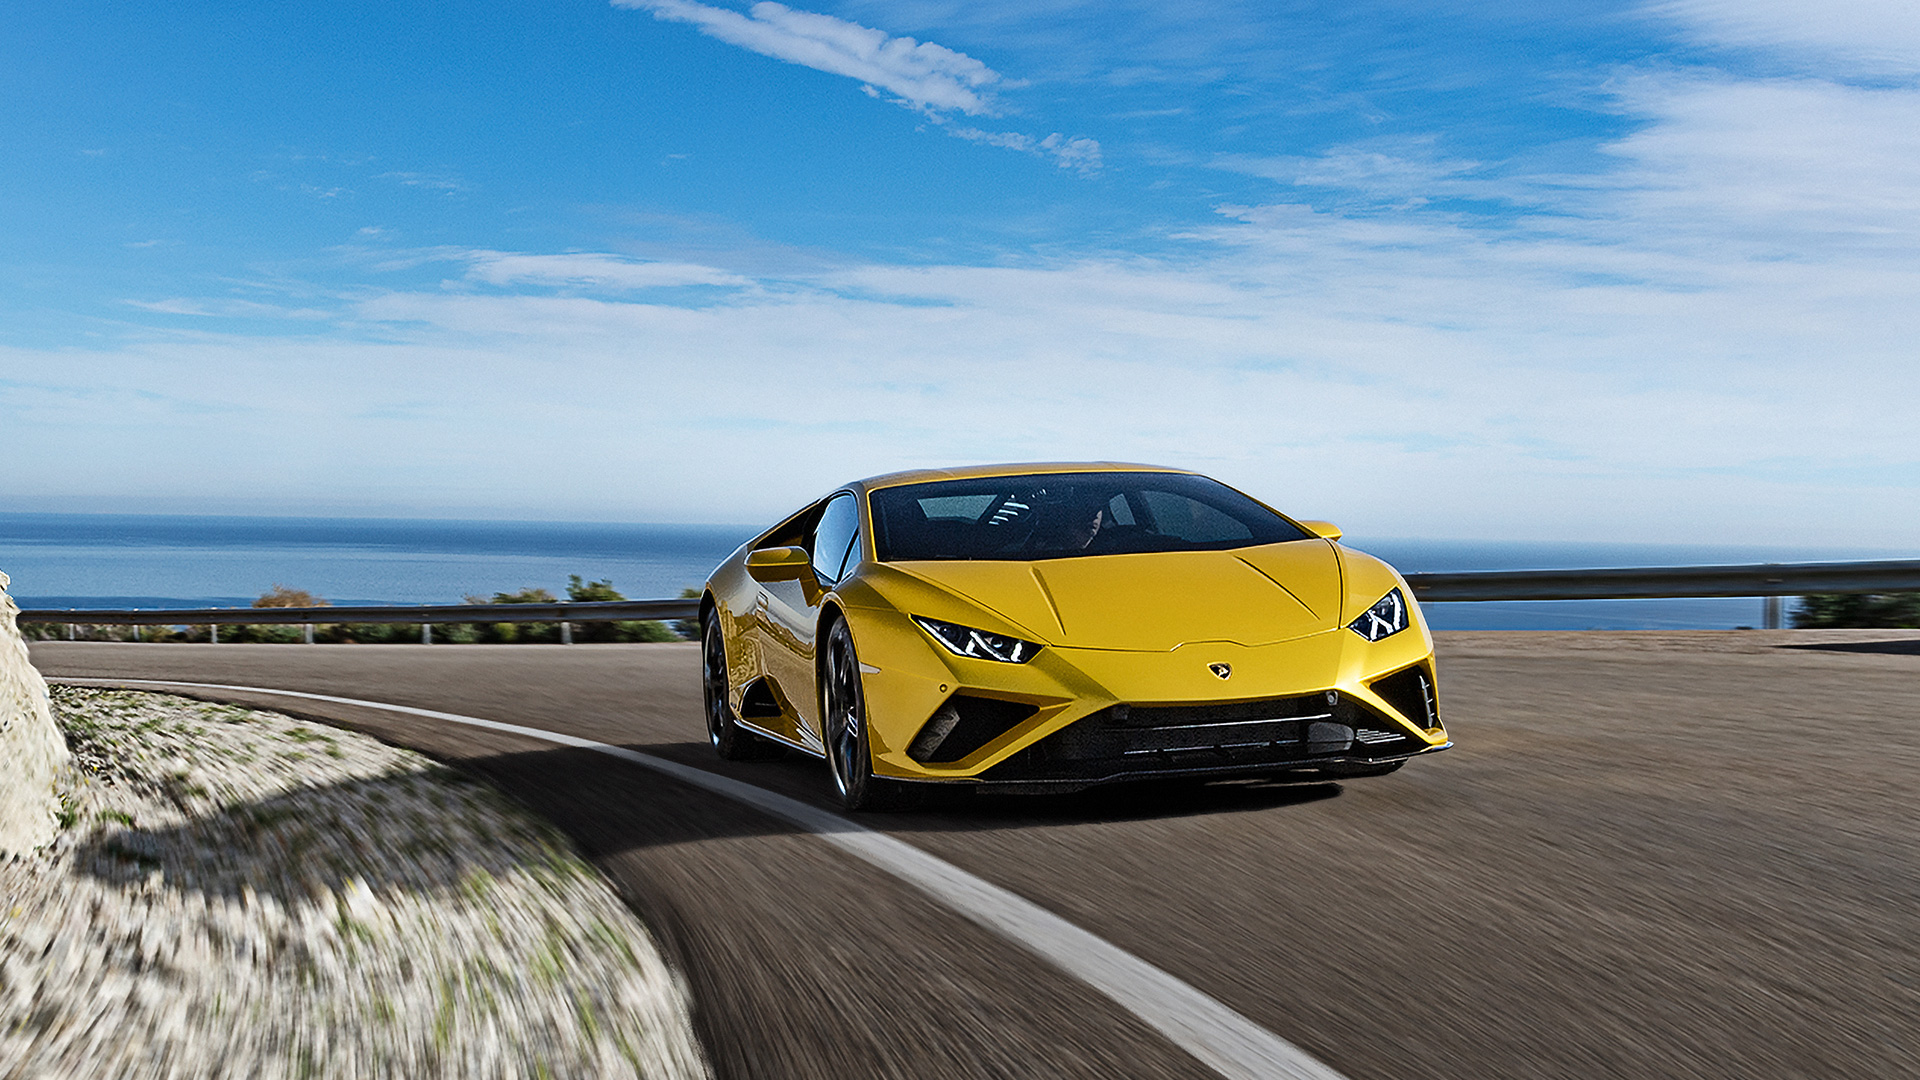 Lamborghini Huracán EVO Spyder Now Available With RWD - The Car Guide